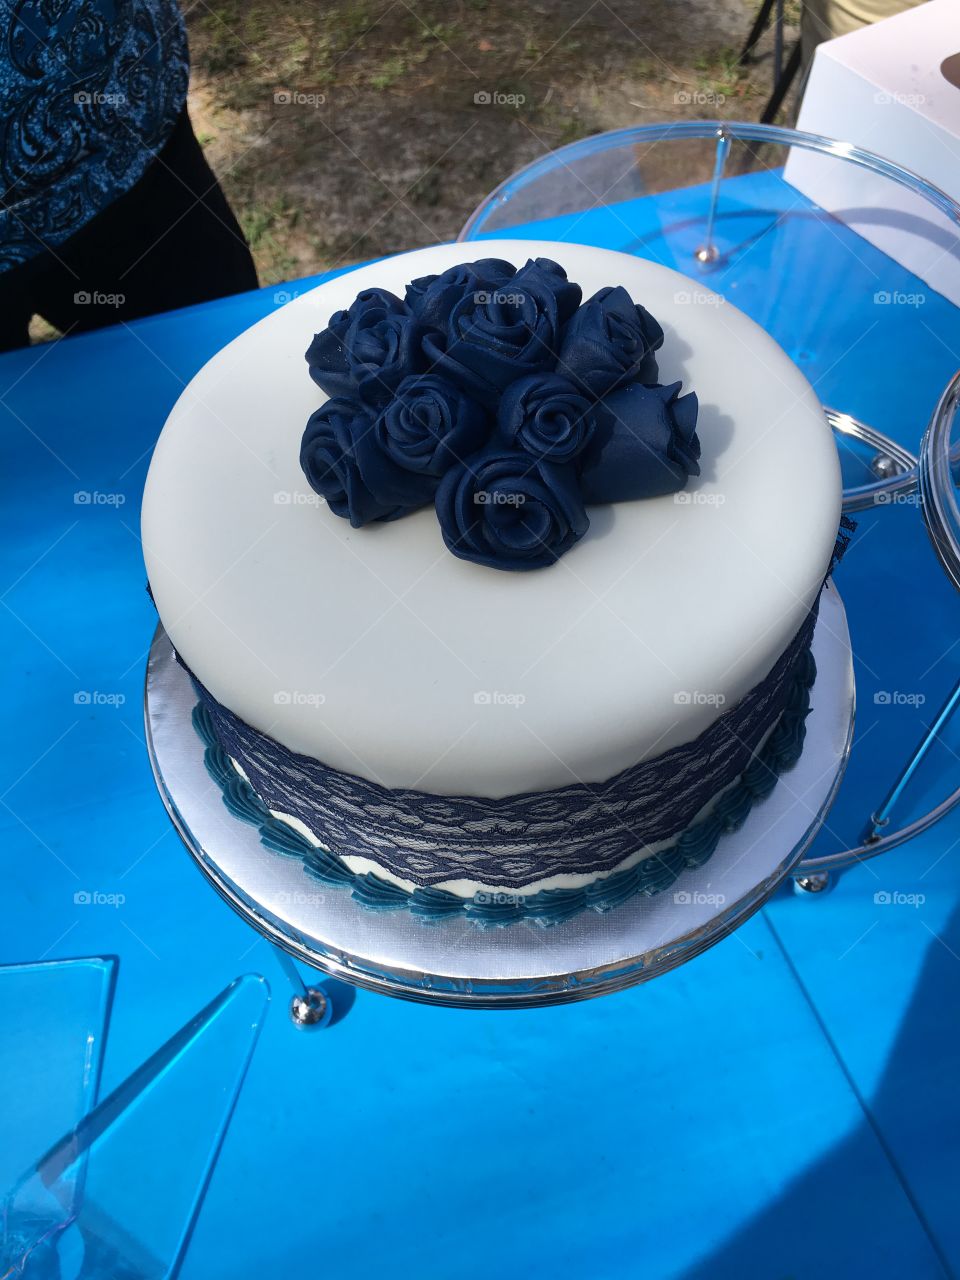 Beautiful wedding cake, delicious by the way.